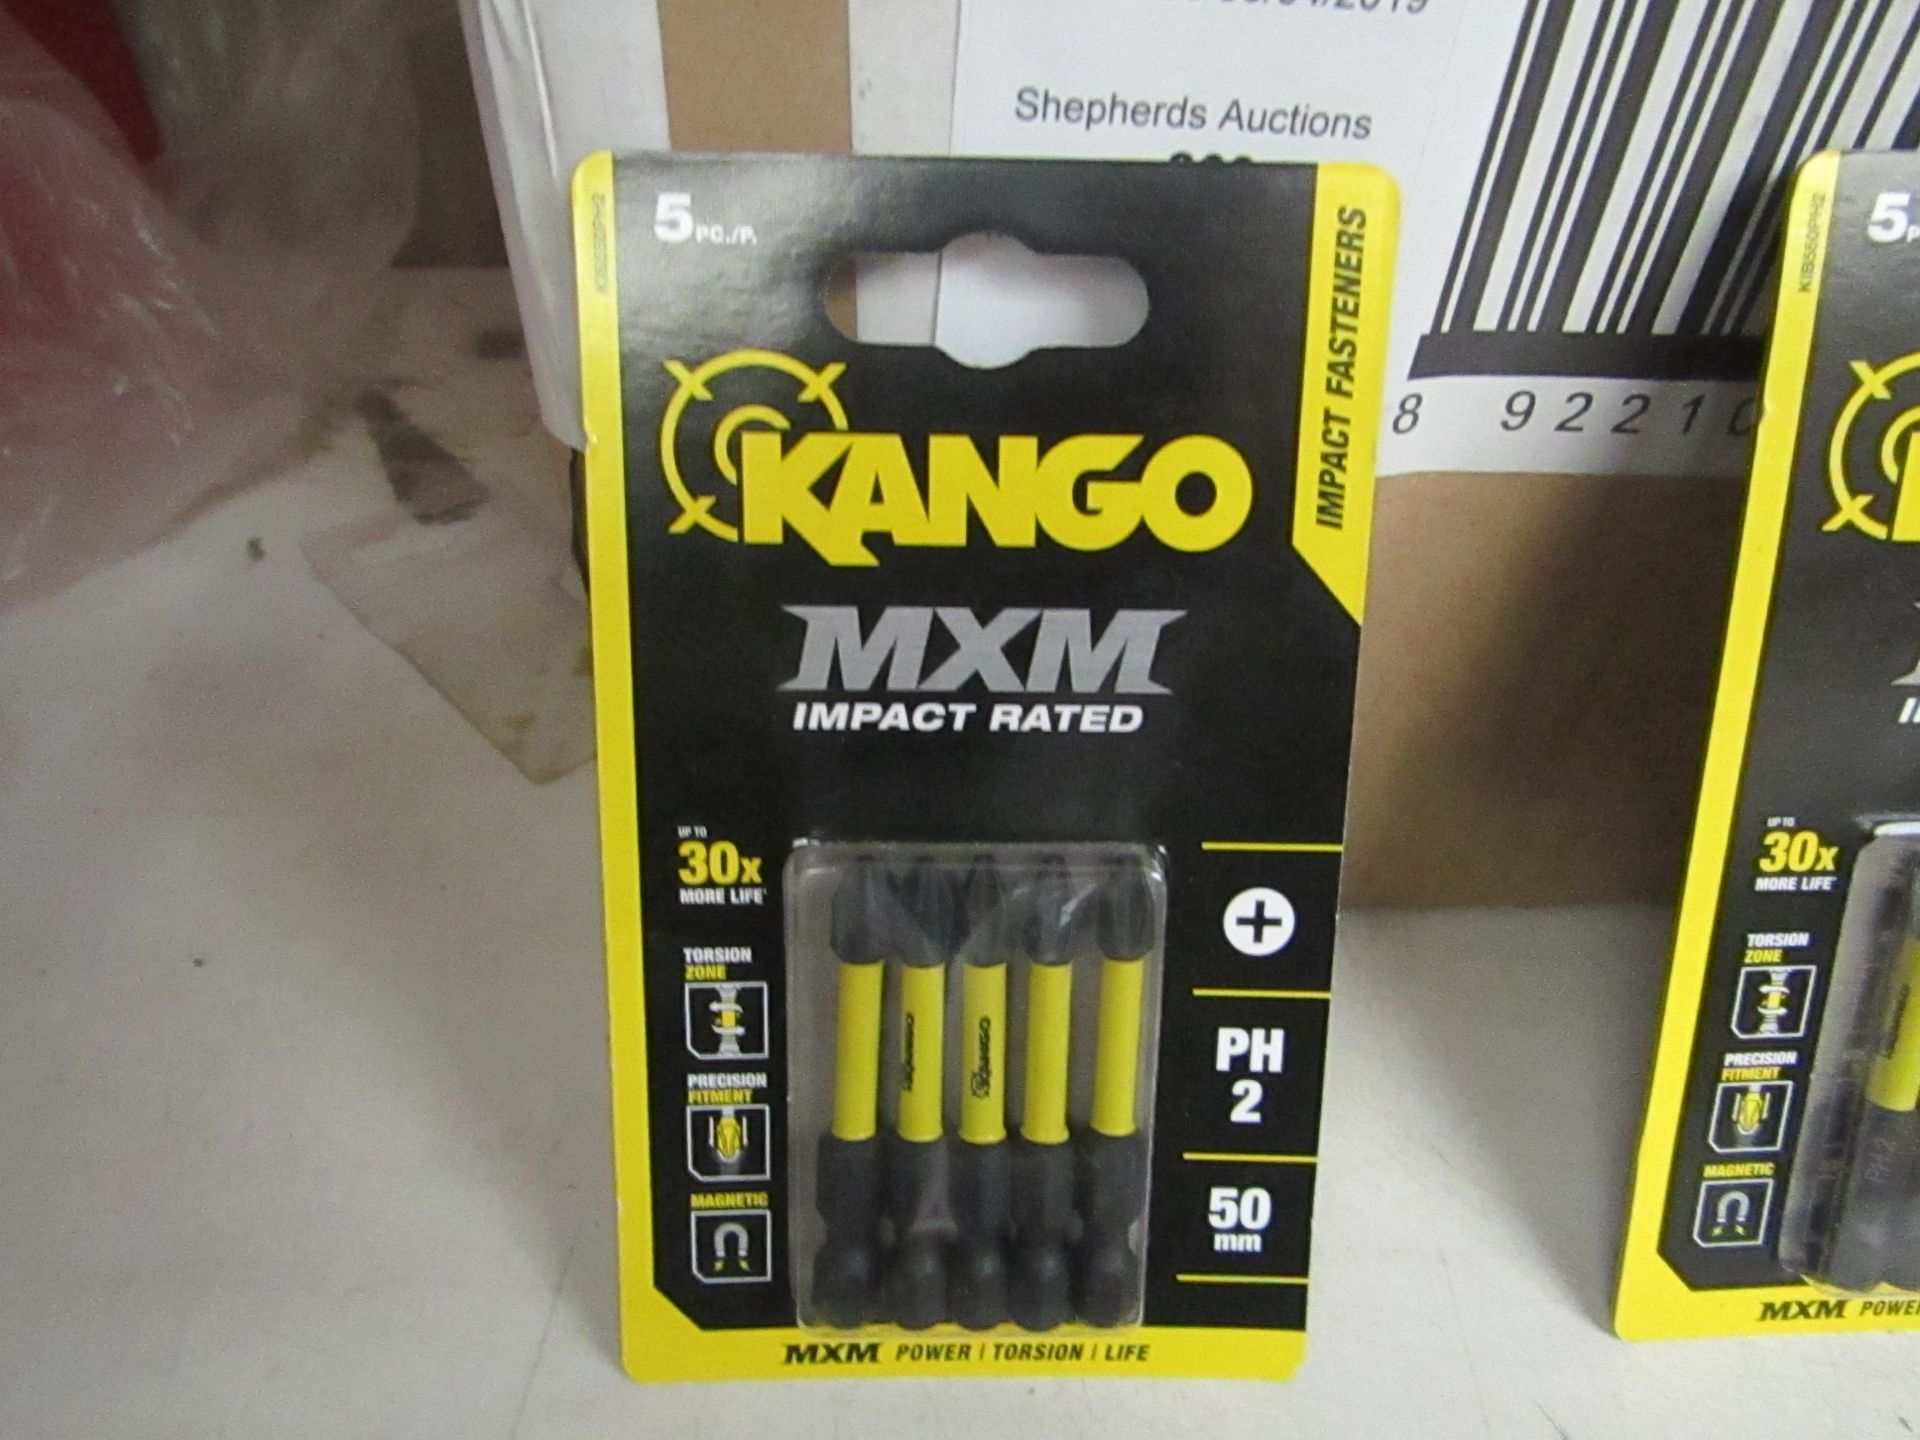 Pack of 5x Extra Length Kango MXM Impact rated PH2 driver bits in packaging, new